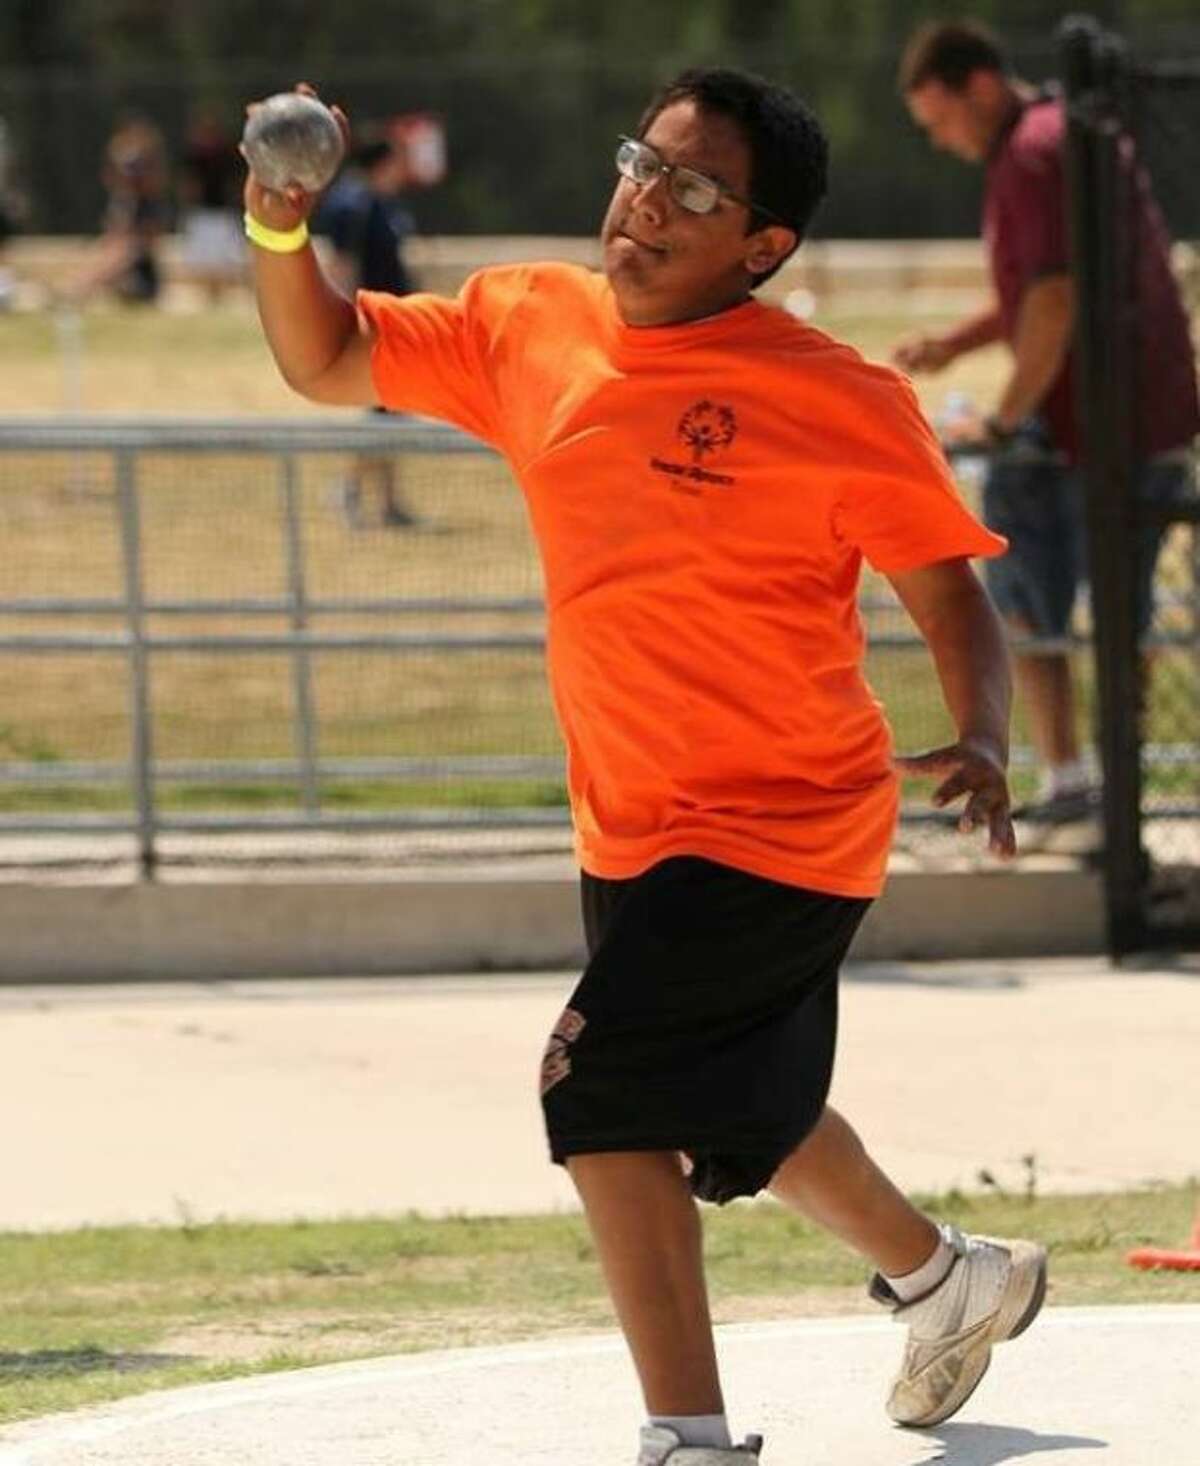 Special Olympics Texas needs volunteers at the Heart of East Texas Spring Games April 25-26. The games are for athletes competing in track and field and tennis.